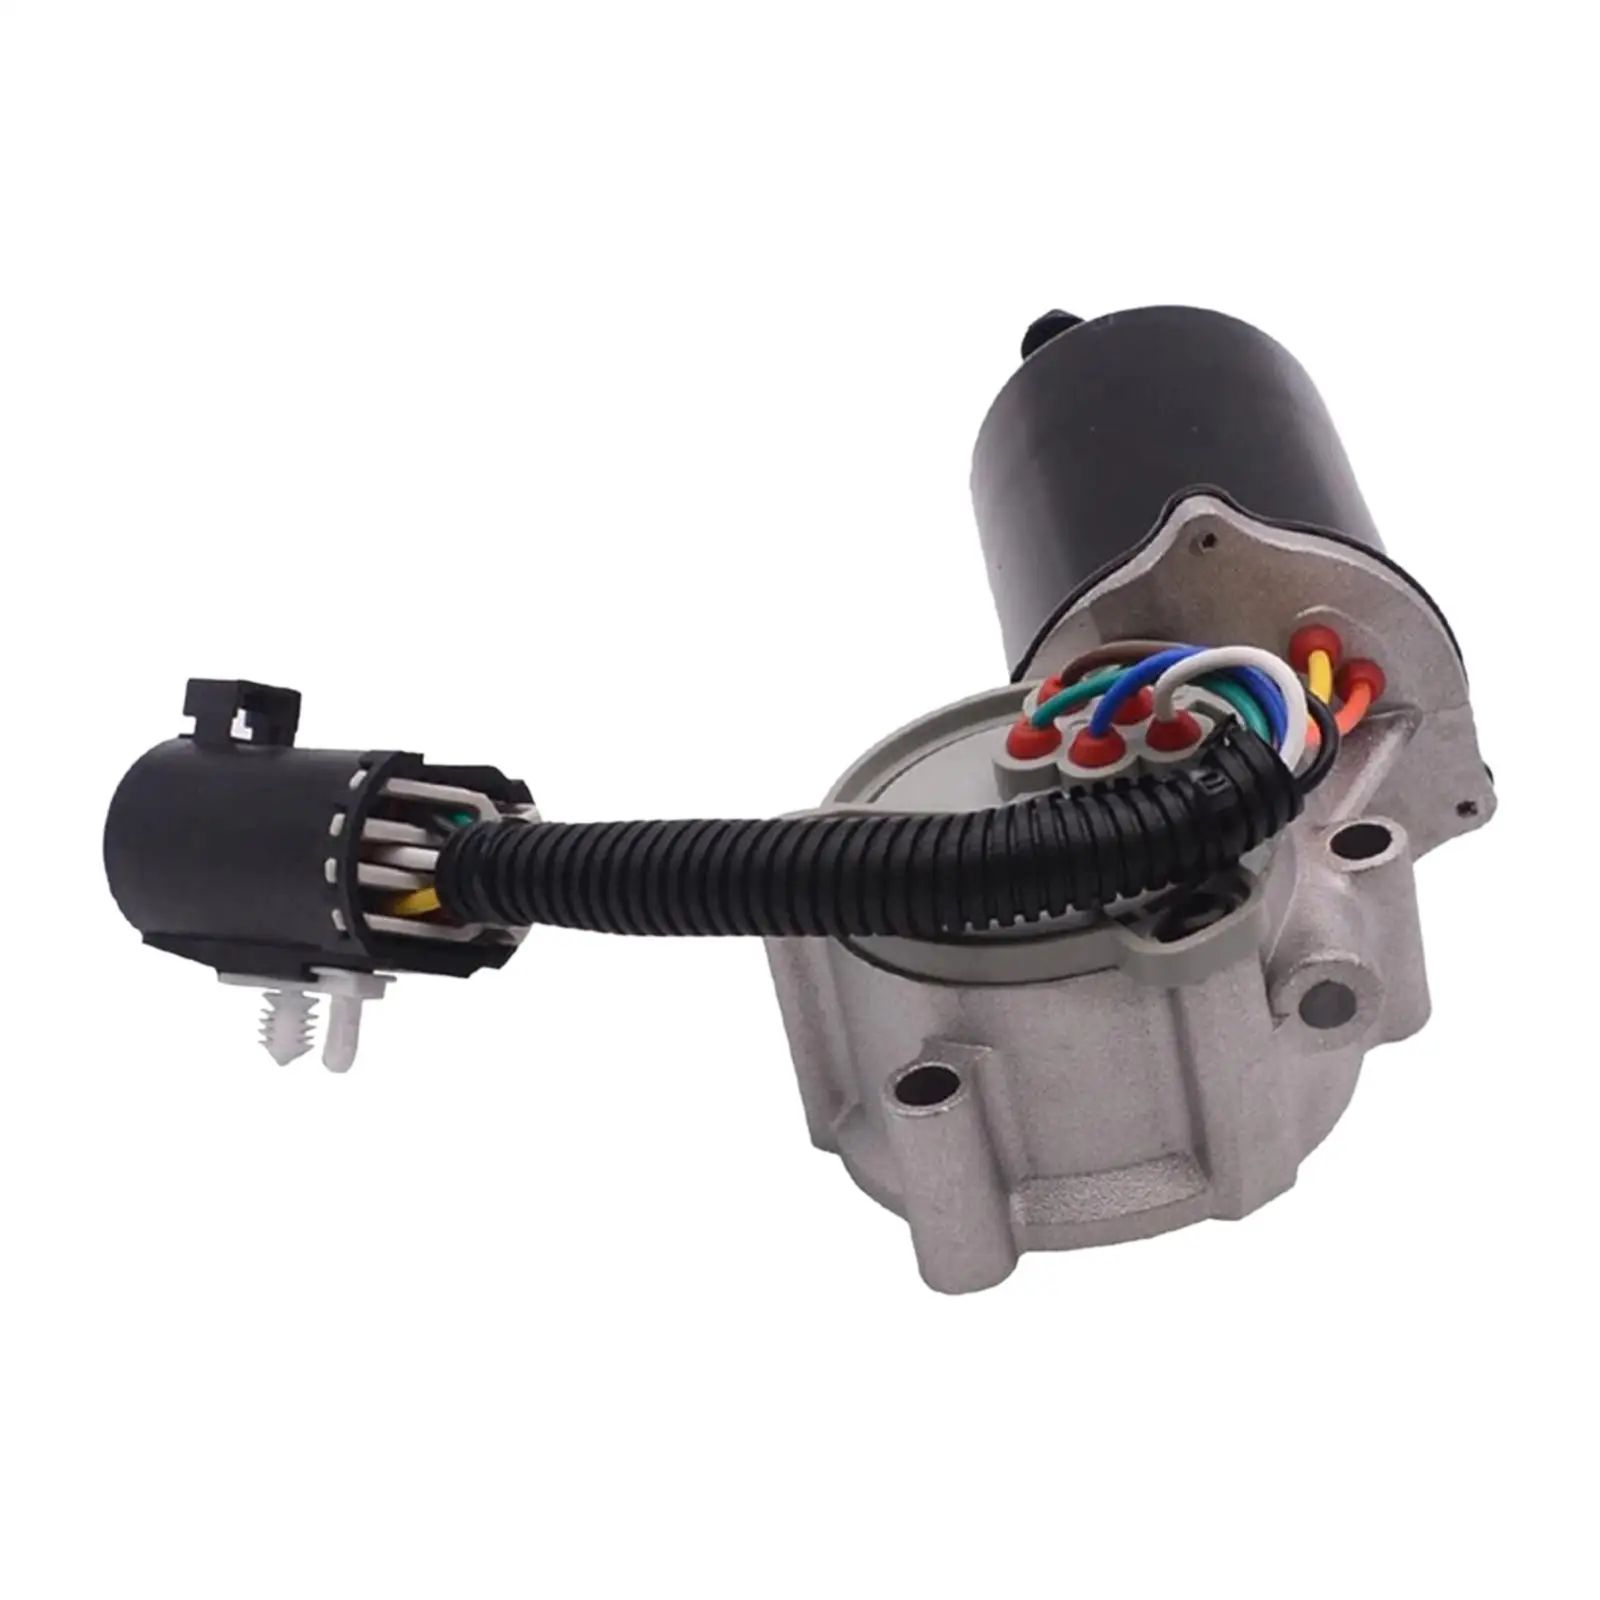 Shift Motor Premium Spare Parts High Performance Replaces Durable 47303-h1010 47303-h1001 for Kia Sorento 2006-2008